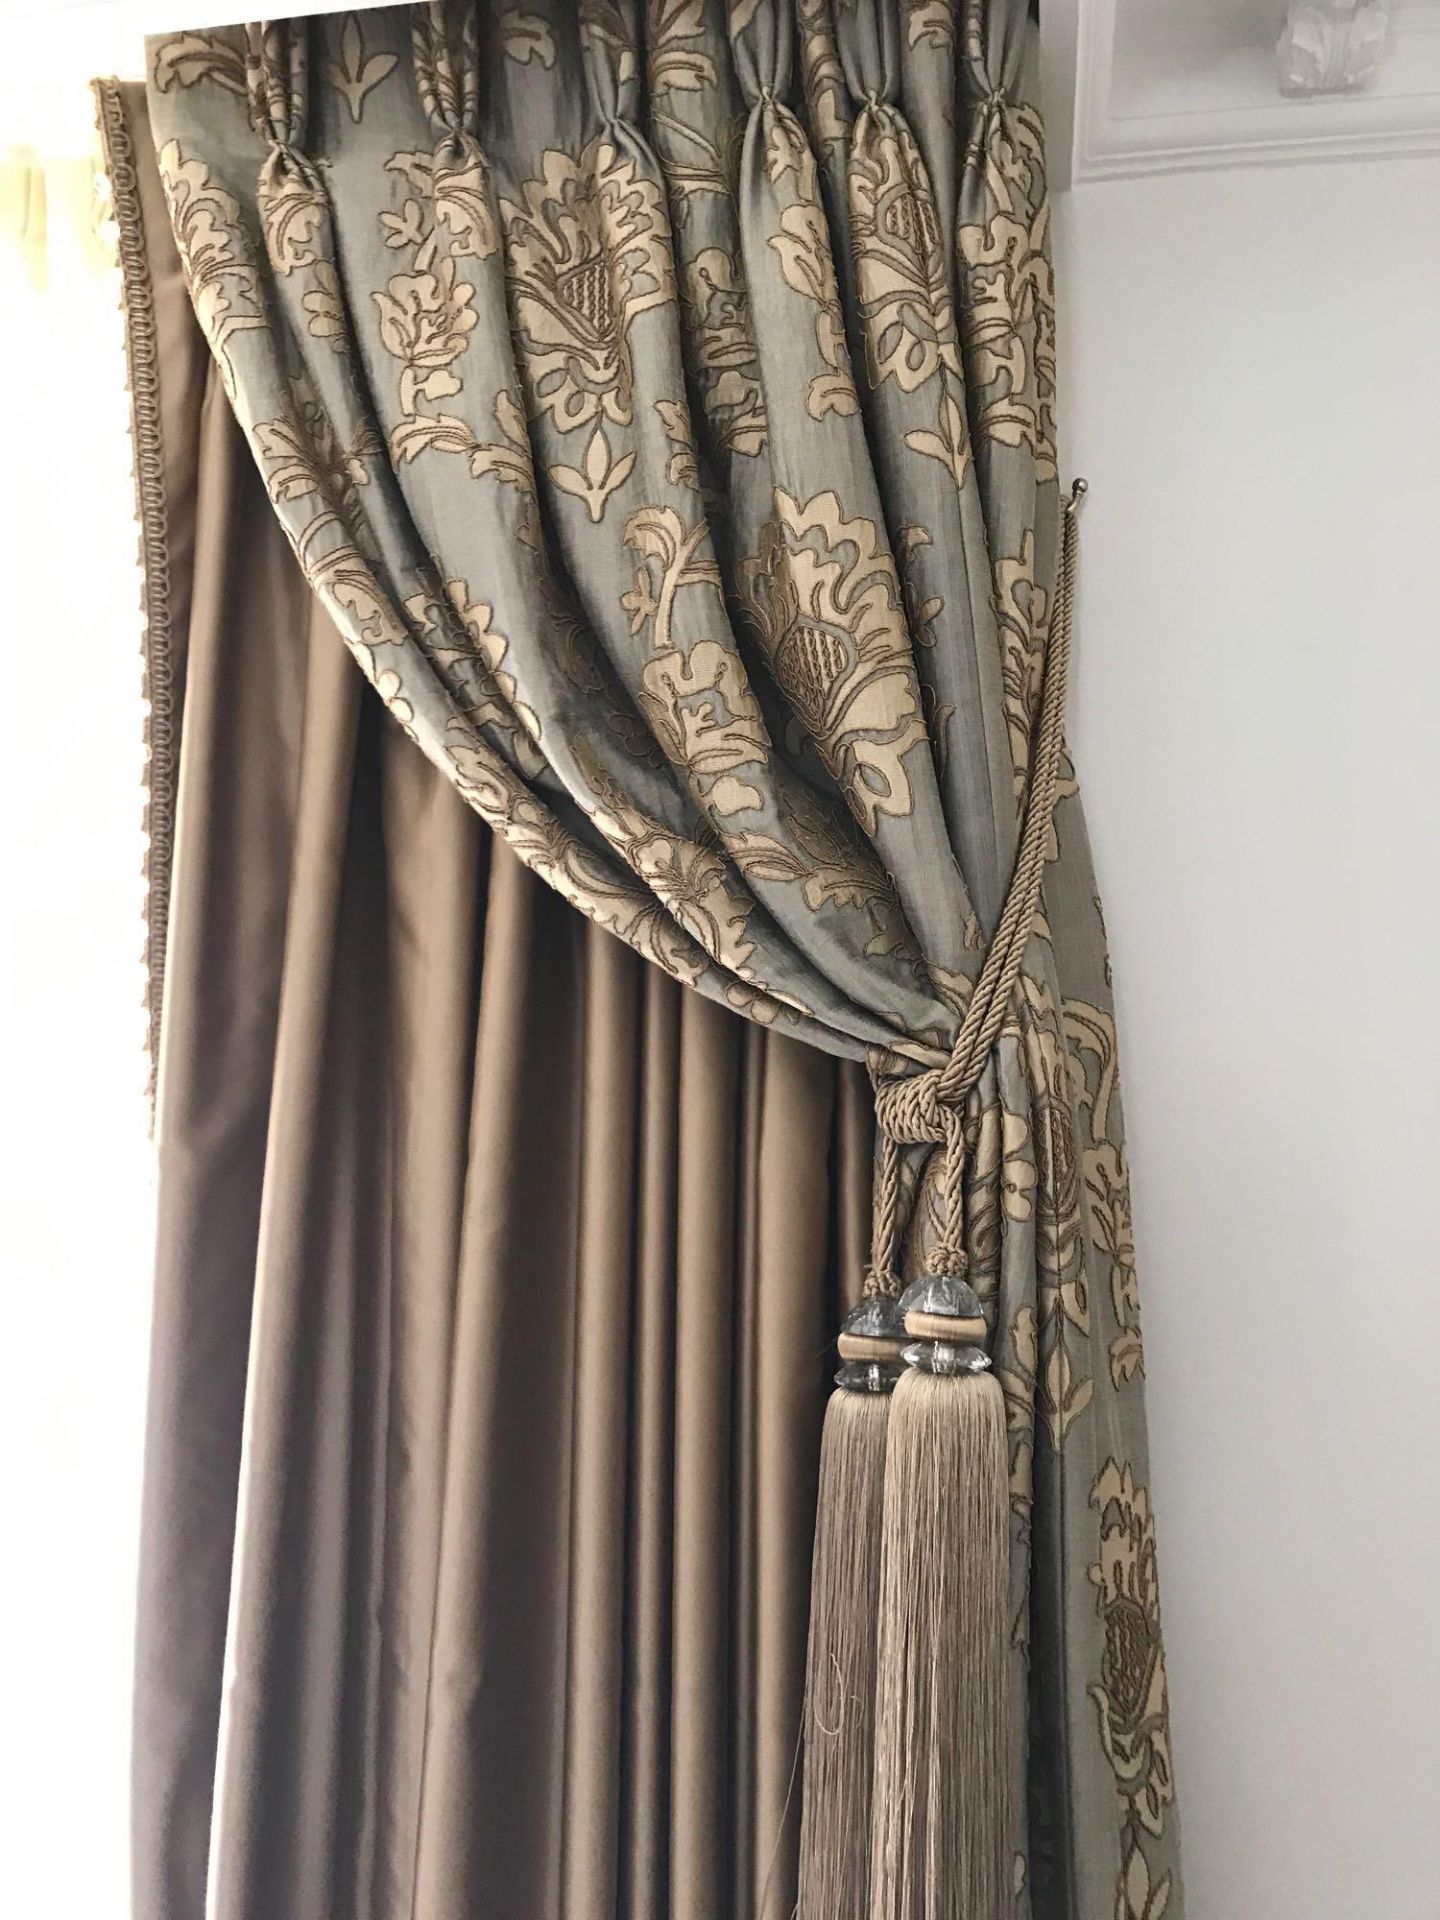 A Pair Of Silk Drapes And Jabots With Crystal Trim Gold Green Embroidered Pattern 255 x 250cm Room - Image 2 of 2